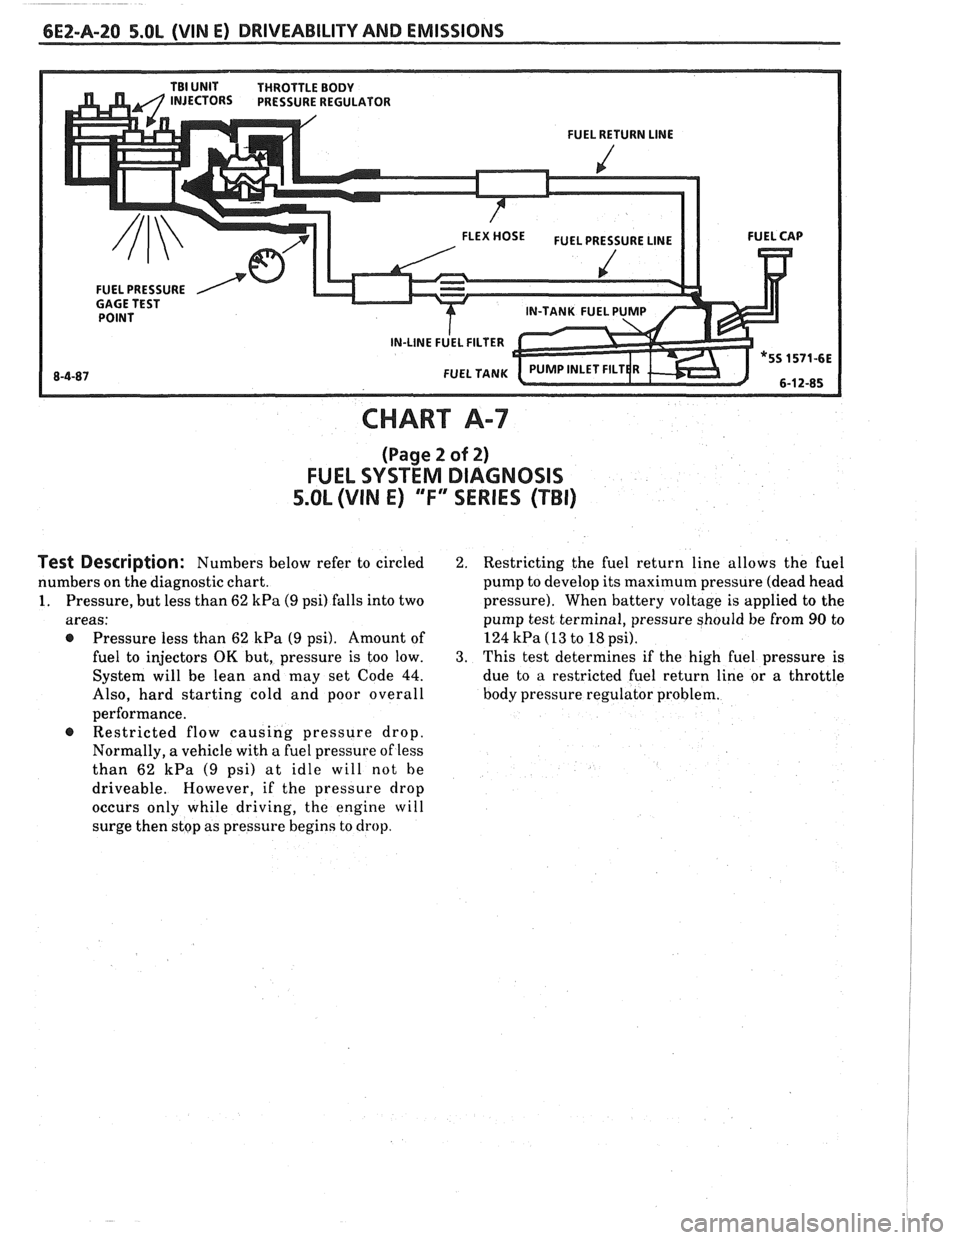 PONTIAC FIERO 1988  Service Repair Manual 
6EZ-A-20 5.0L (VIN E) DRIVEABILITY AND  EMISSIONS 
FUEL  PRESSURE 
CHART A-7 
(Page 2 of 2) 
FUEL  SYSTEM  DIAGNOSIS 
5.OL (VIN E) "F" SERIES (TBI) 
Test Description: Numbers  below refer to circled 